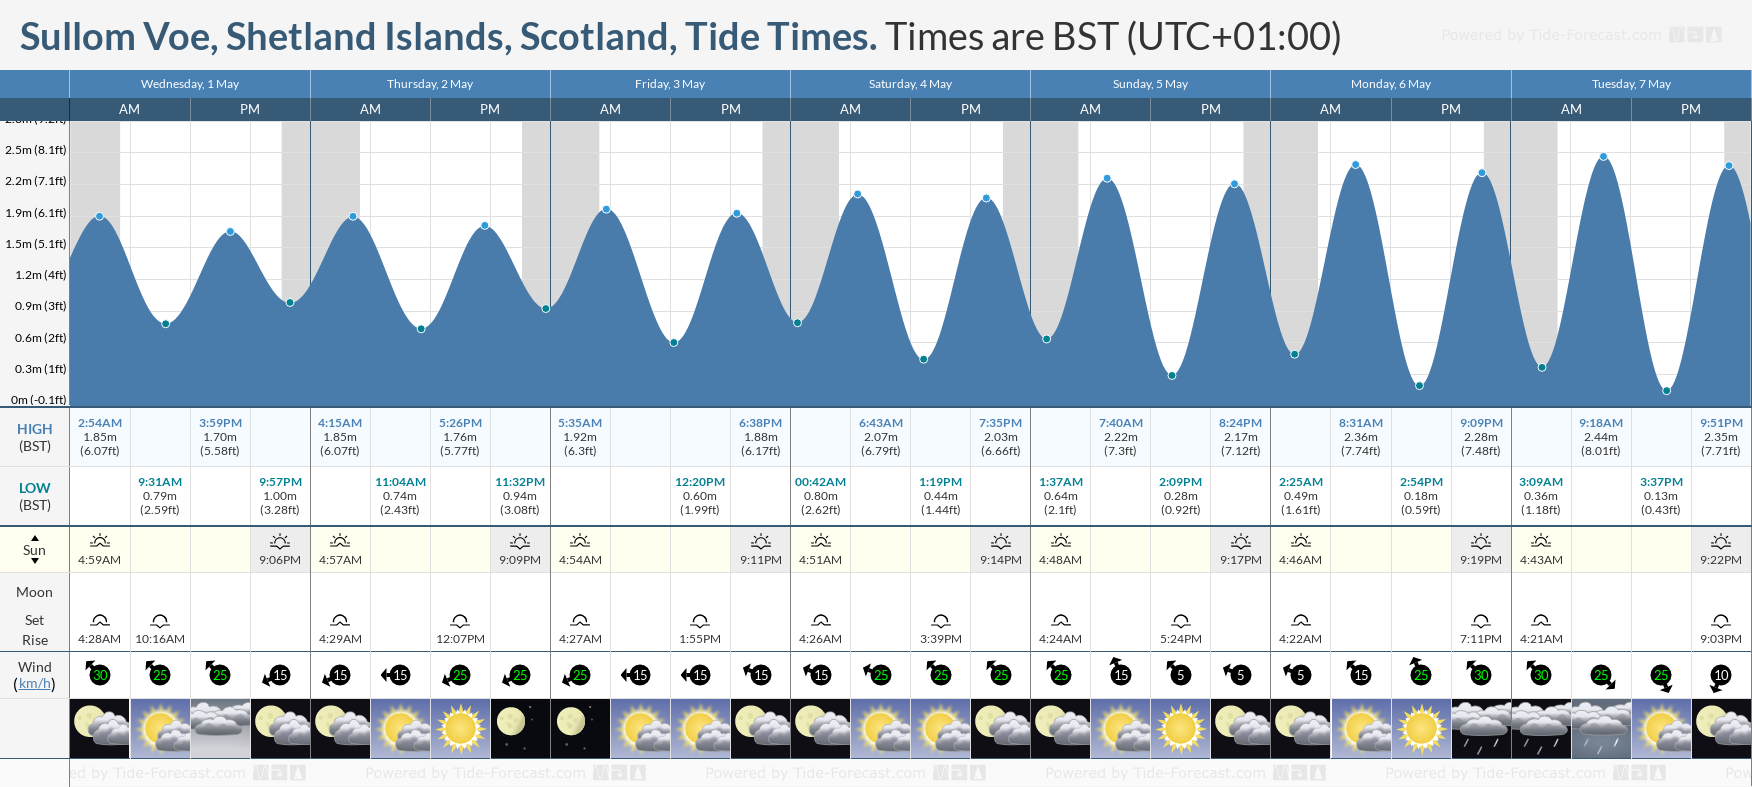 Sullom Voe, Shetland Islands, Scotland Tide Chart including high and low tide times for the next 7 days